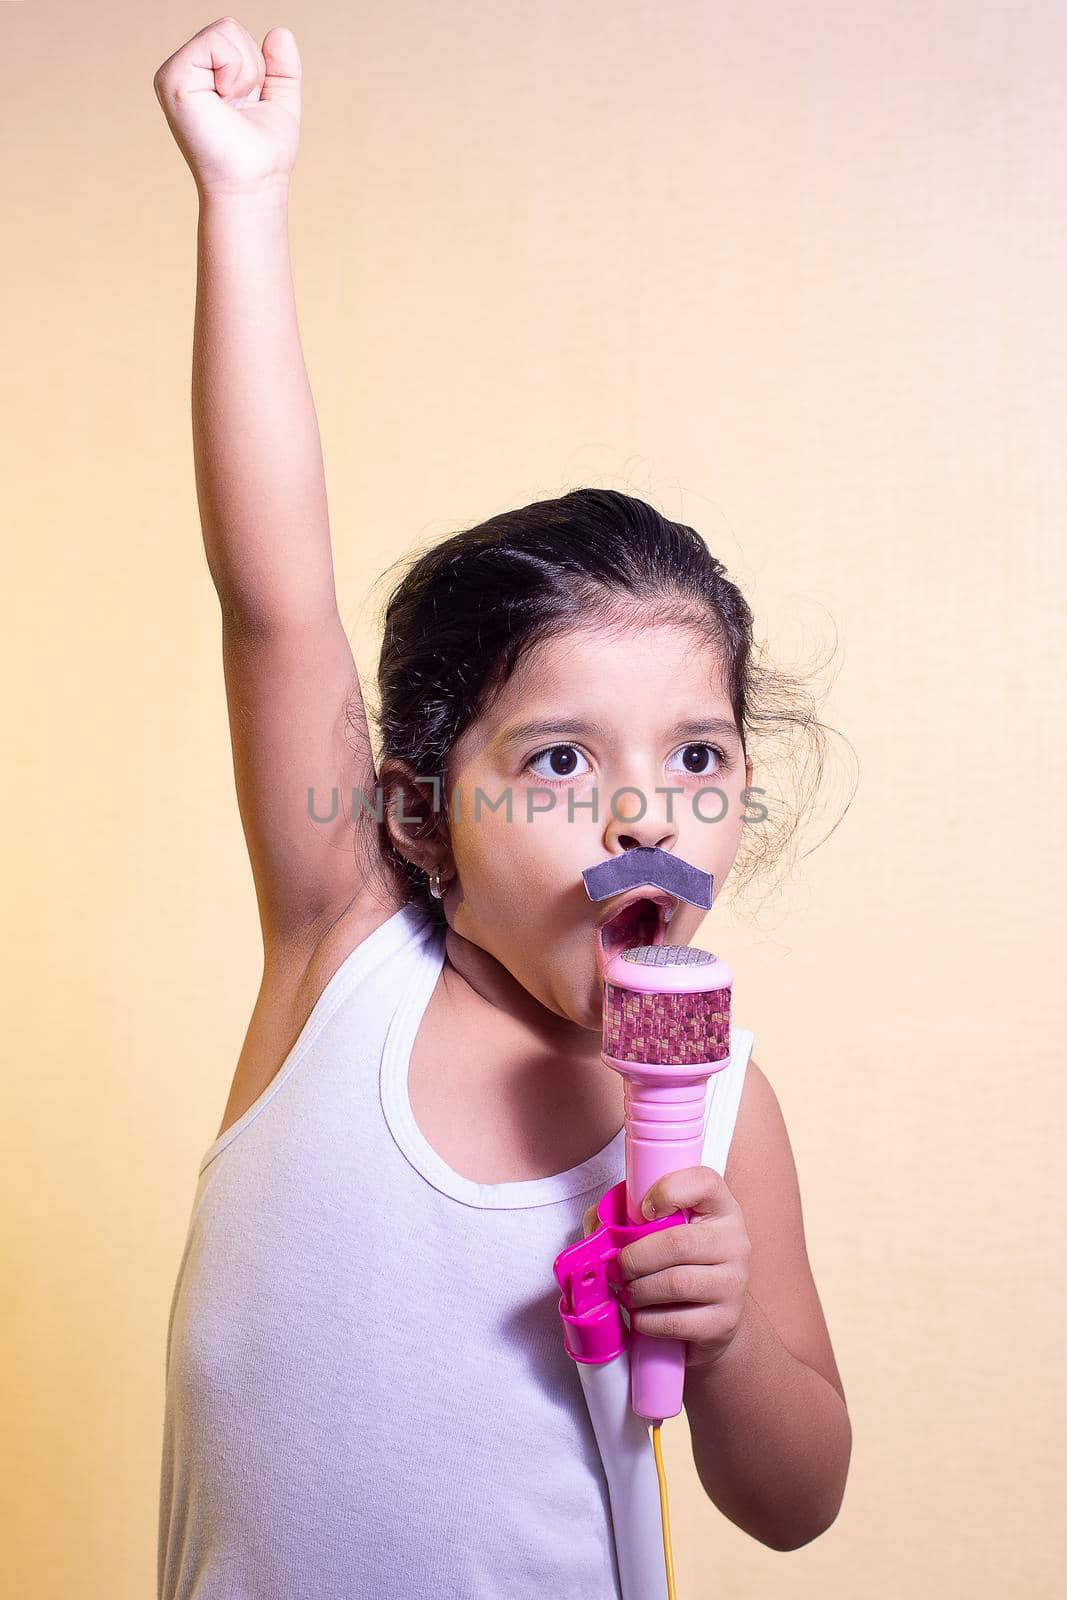 Little girl with a mustache singing using her microphone by eagg13